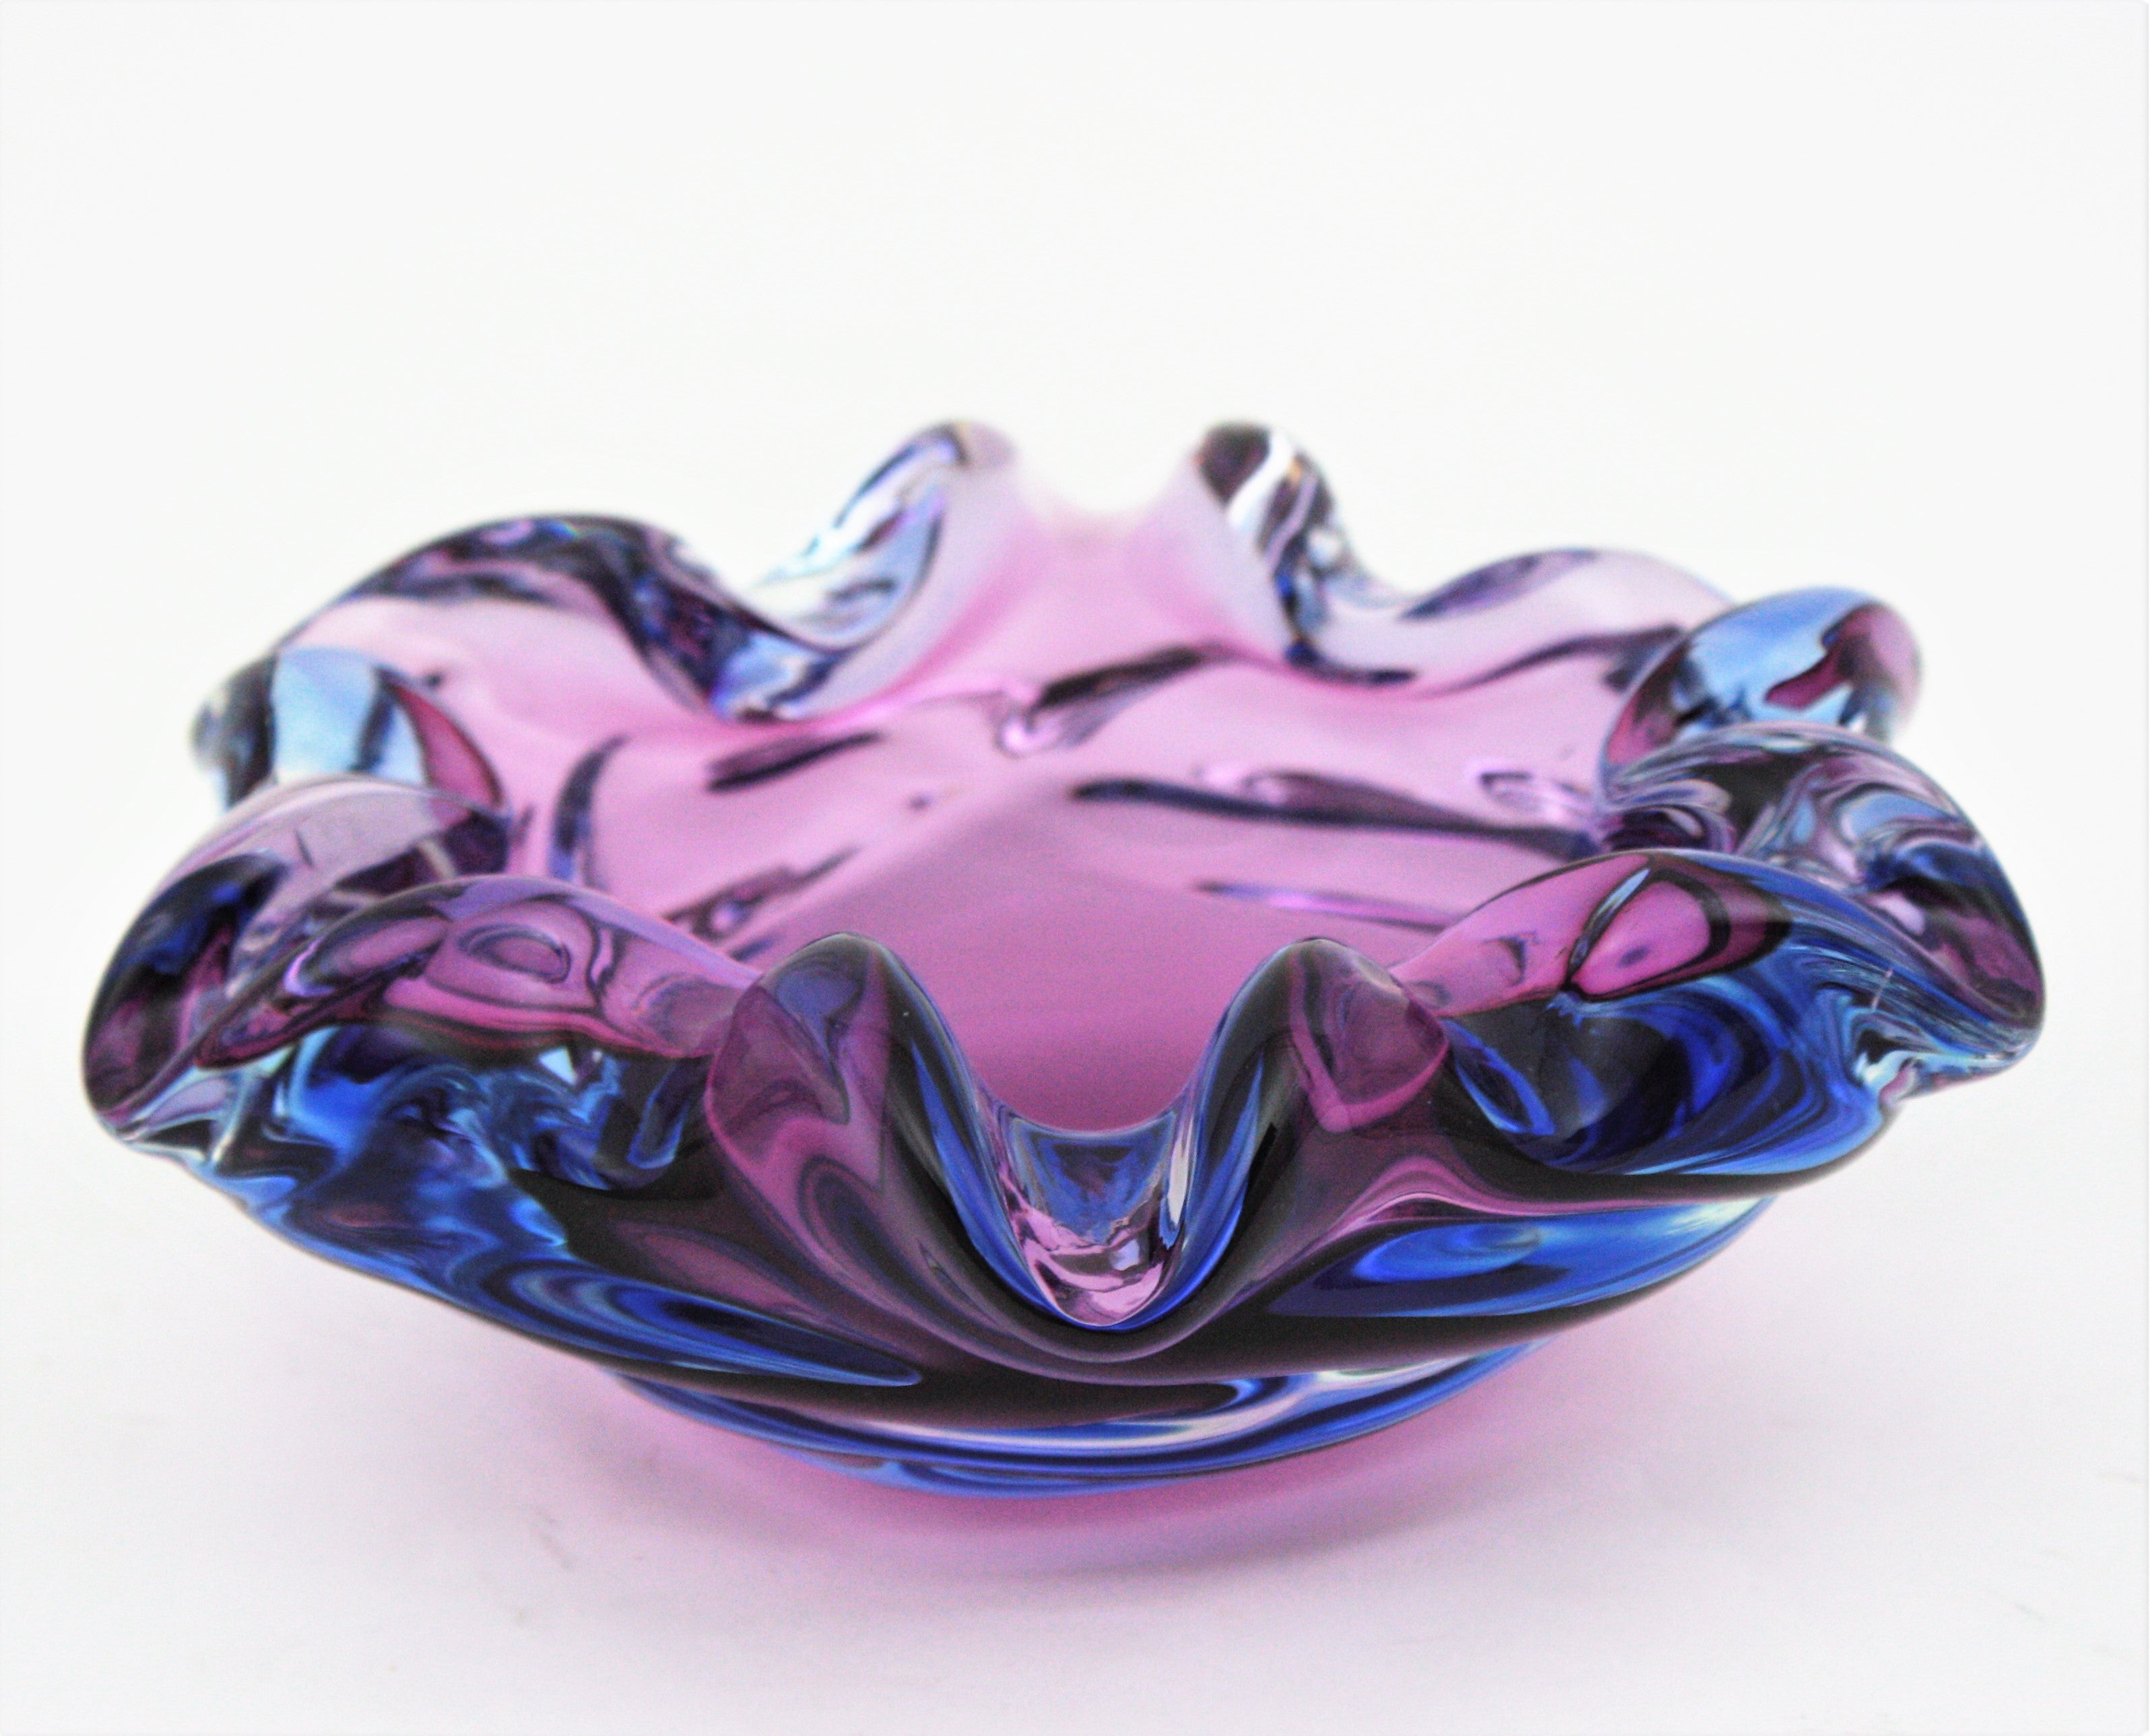 Mid-Century Modern Seguso Murano Pink Purple Sommerso Art Glass Bowl or Ashtray, Italy, 1960s For Sale